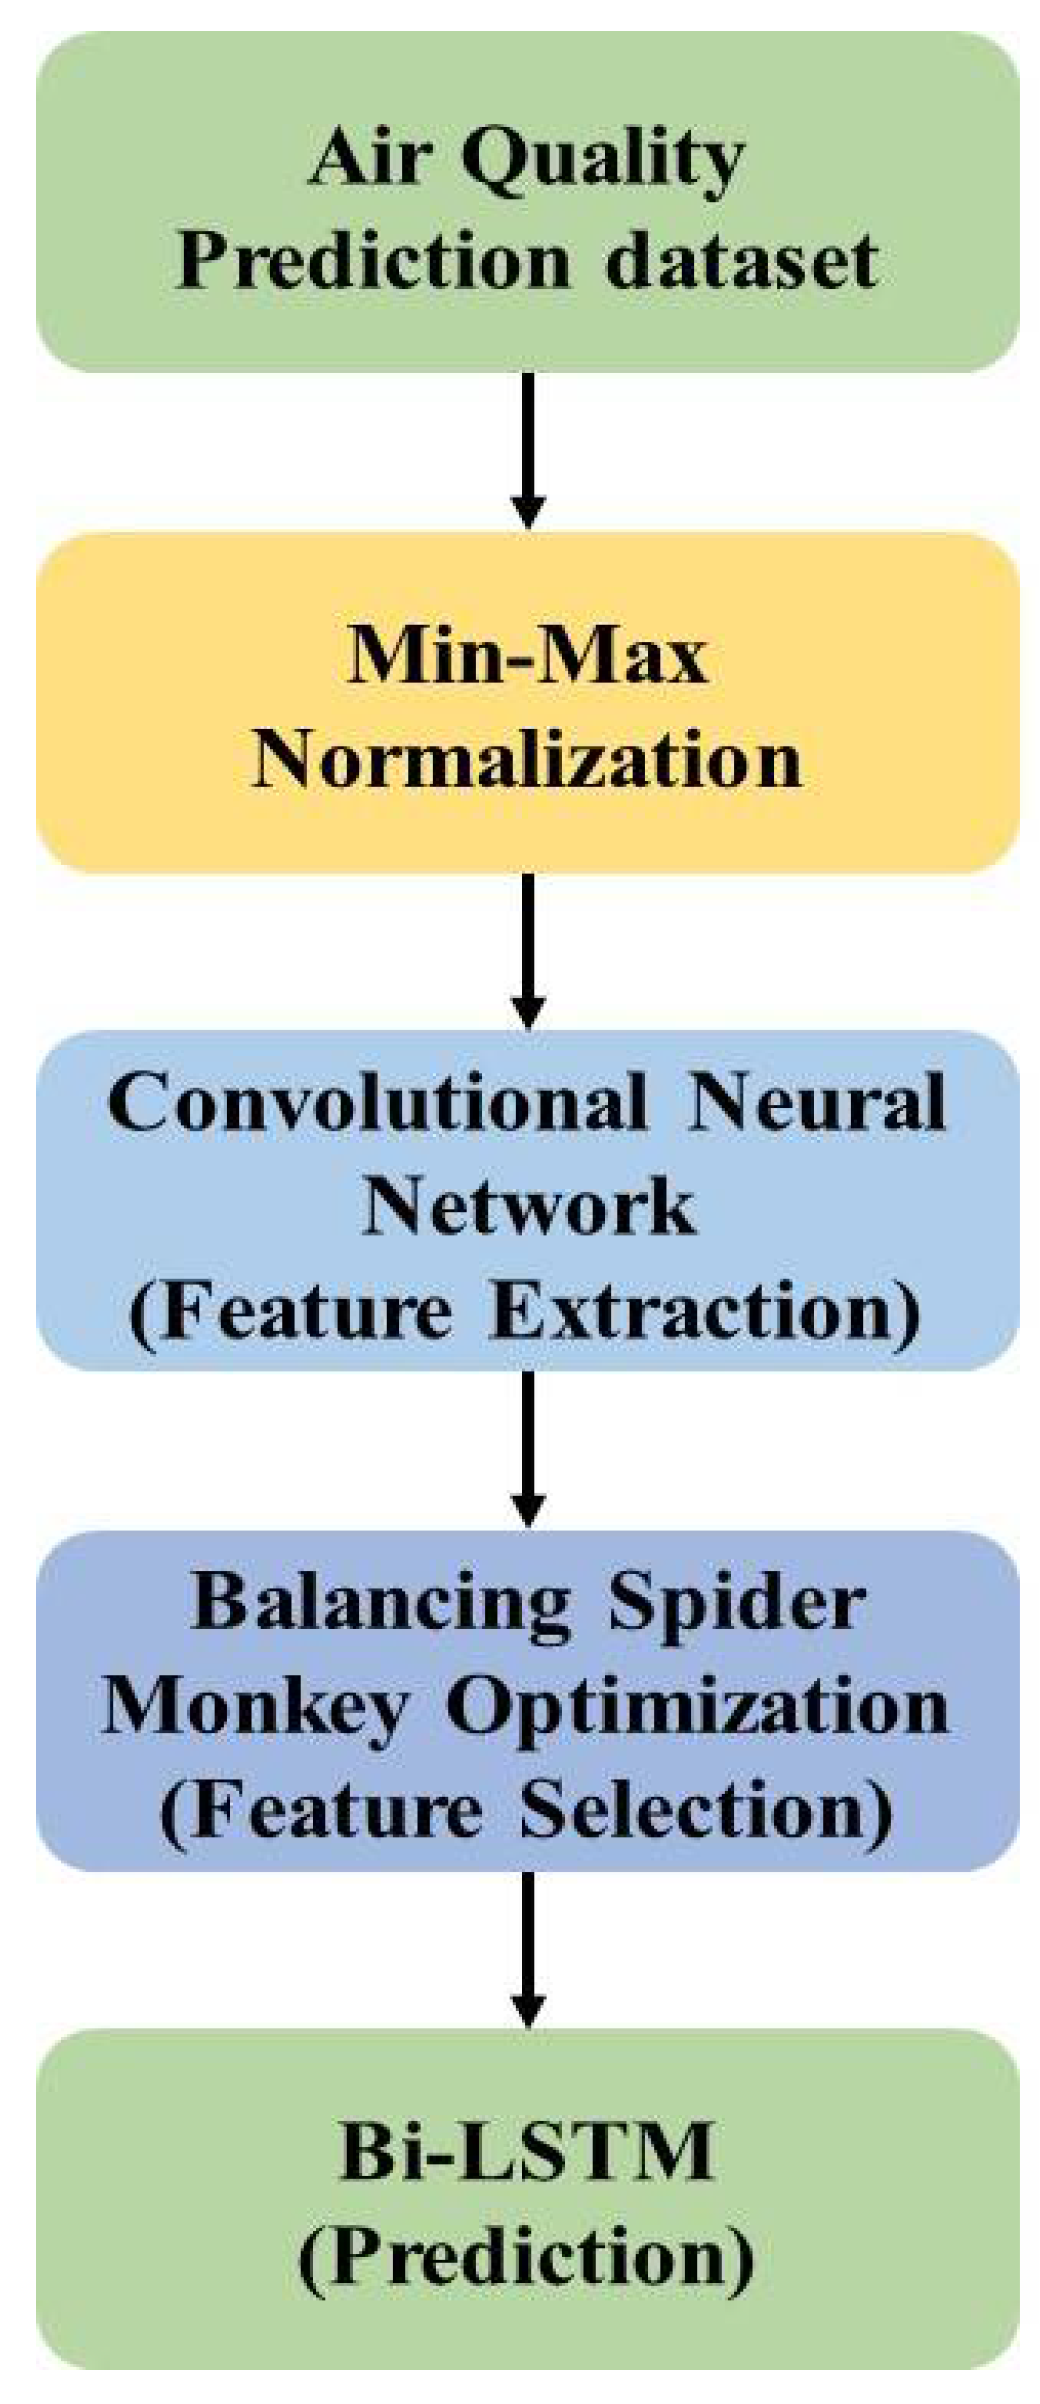 Sustainability | Free Full-Text | Balanced Spider Monkey Optimization with  Bi-LSTM for Sustainable Air Quality Prediction